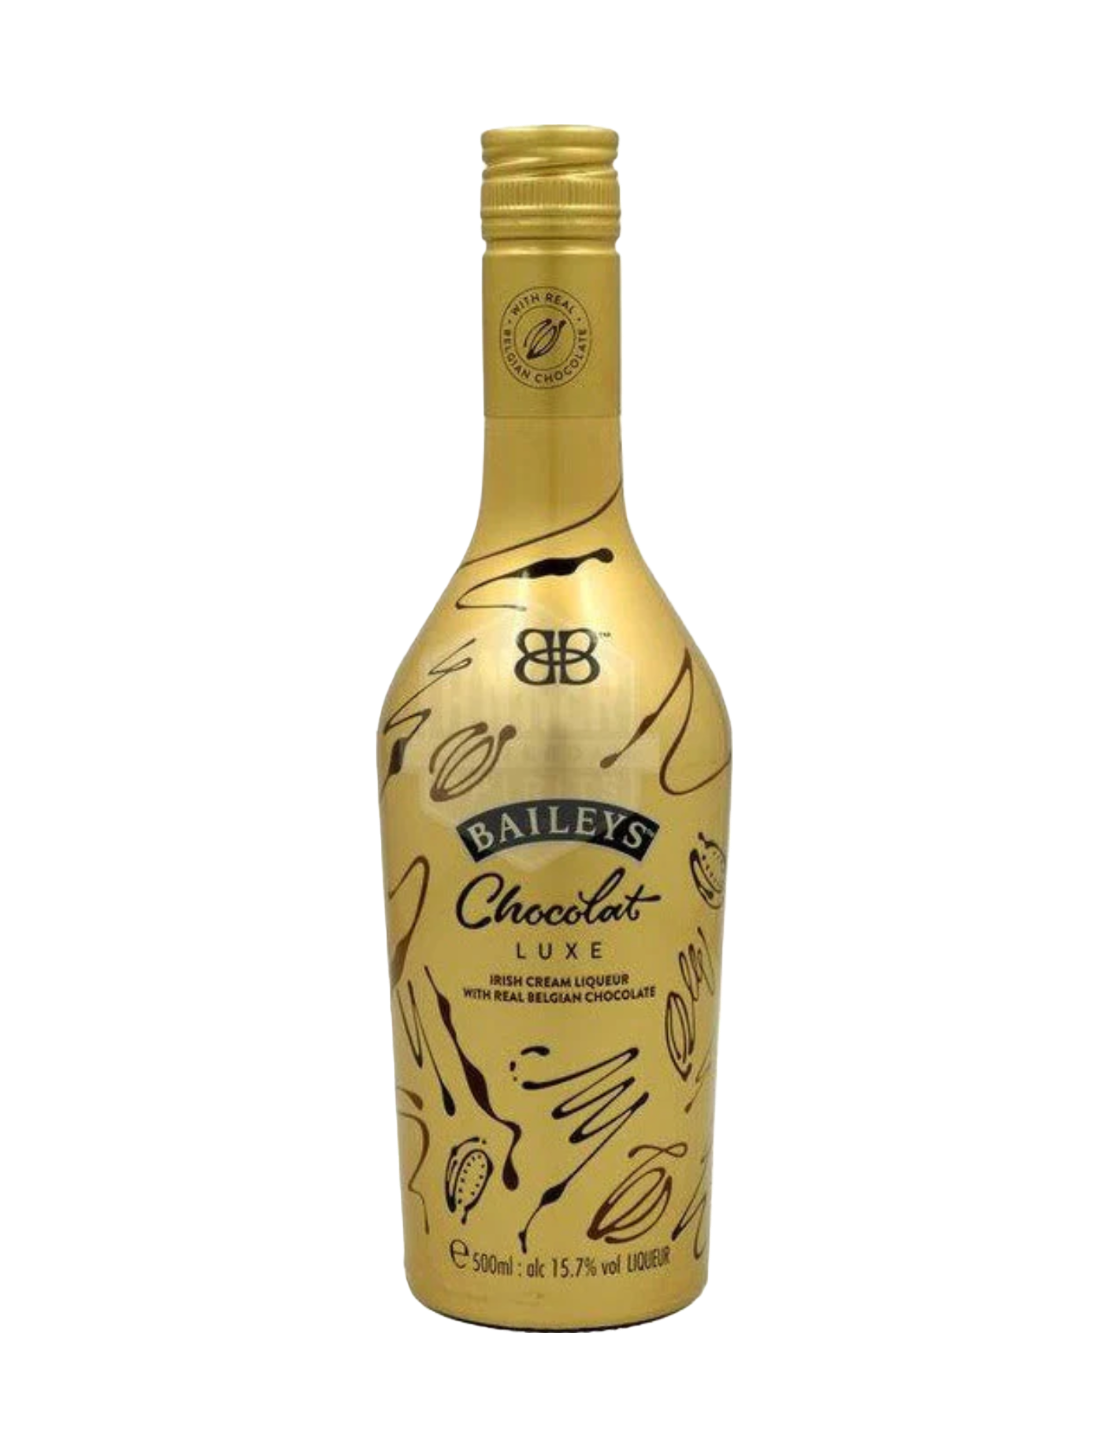 Irresistibly indulgent Baileys Chocolate Liqueur in a gleaming gold bottle, brimming with decadent flavor.